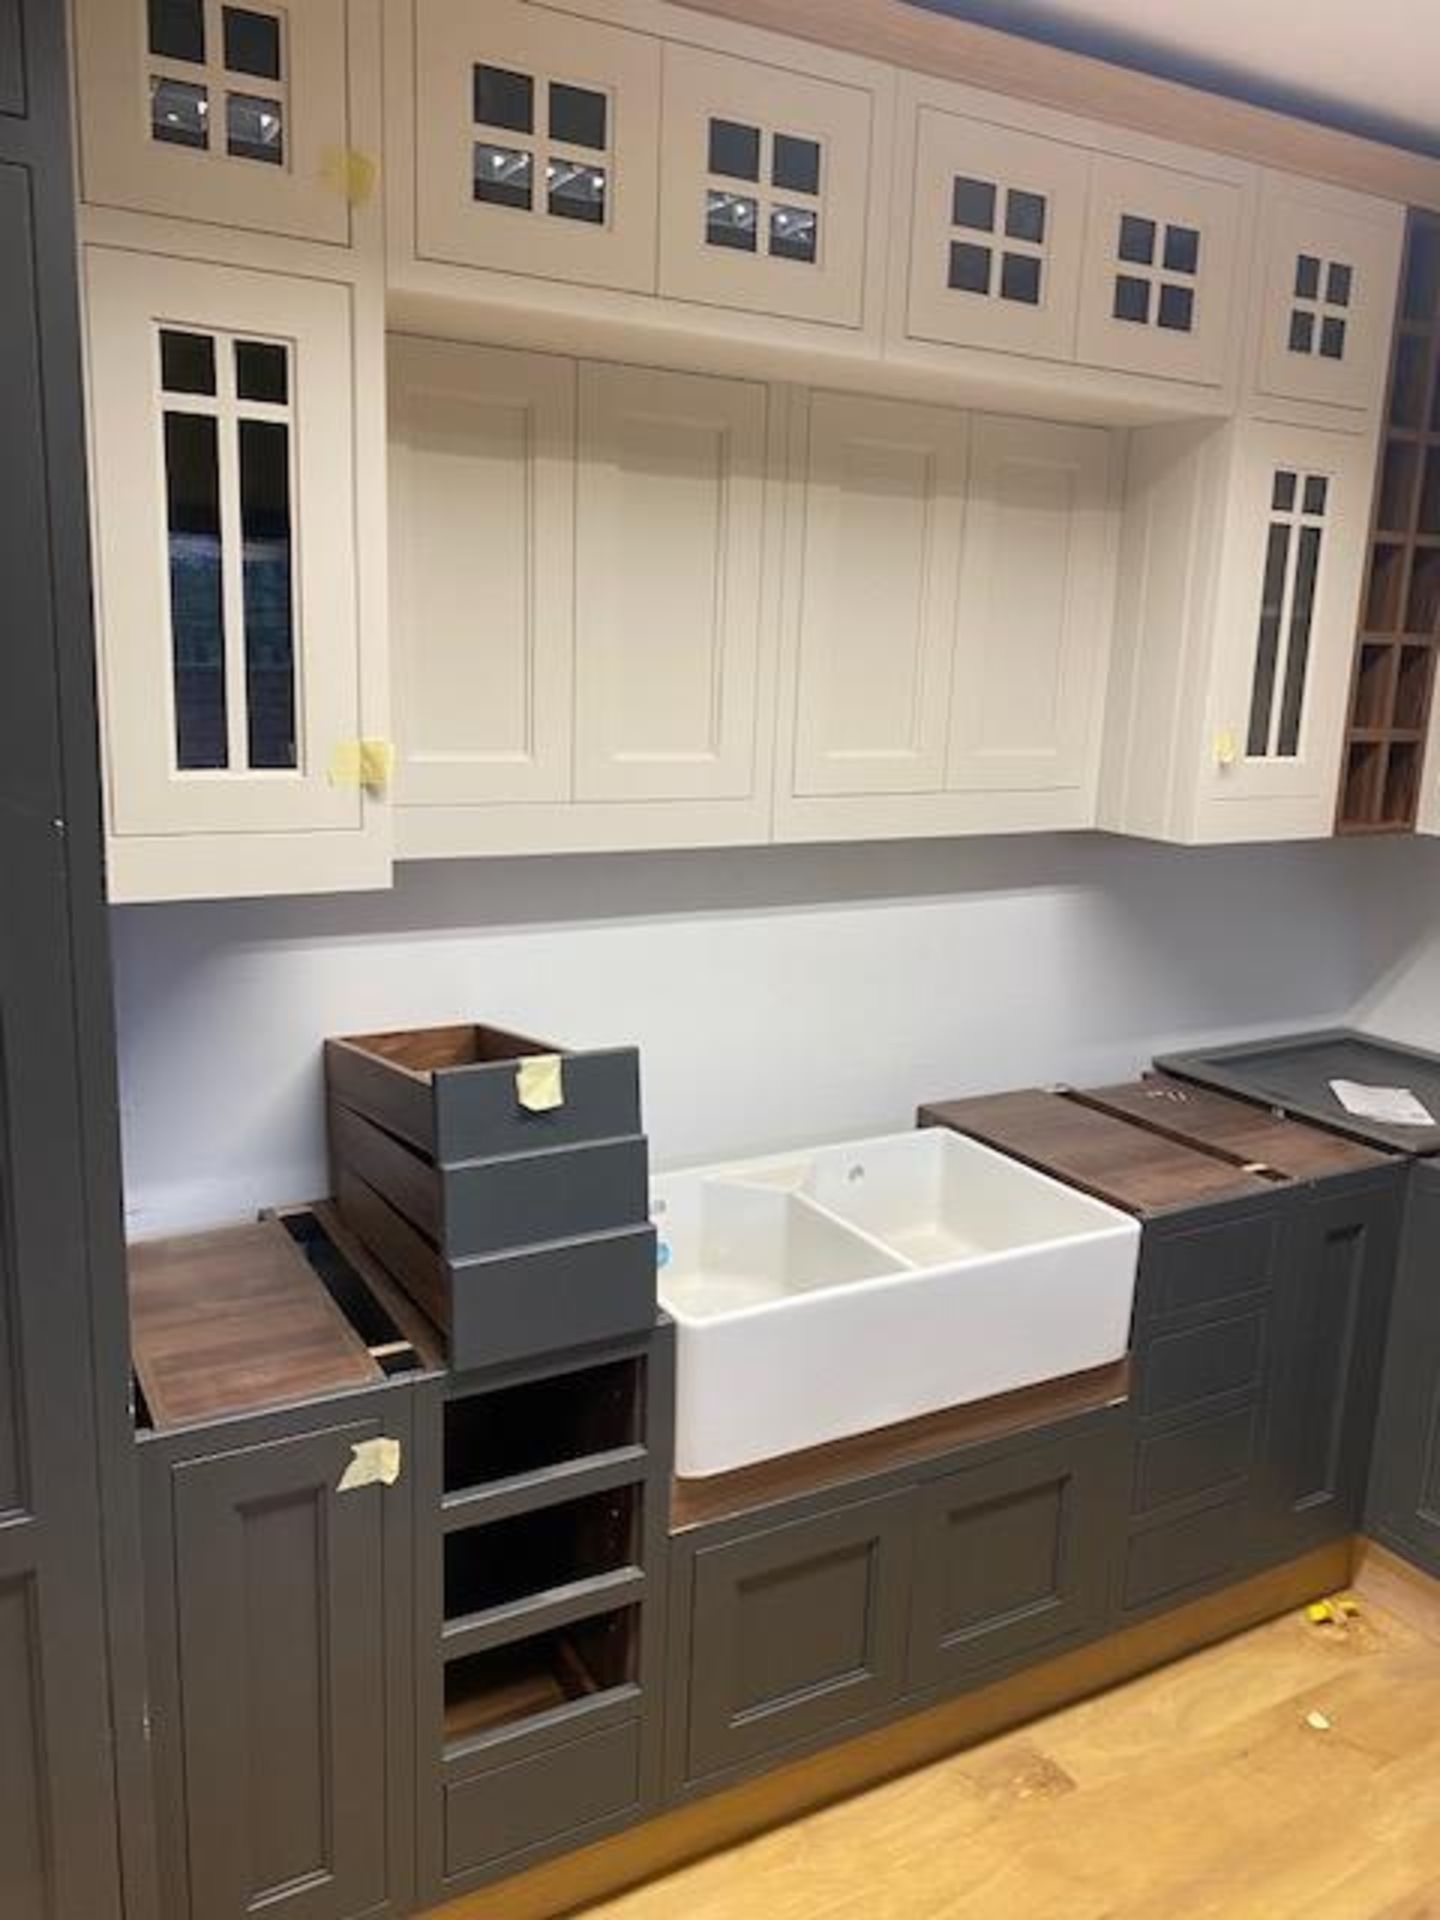 Part built display kitchen (as lotted, please note that appliances are not included) - Image 5 of 9